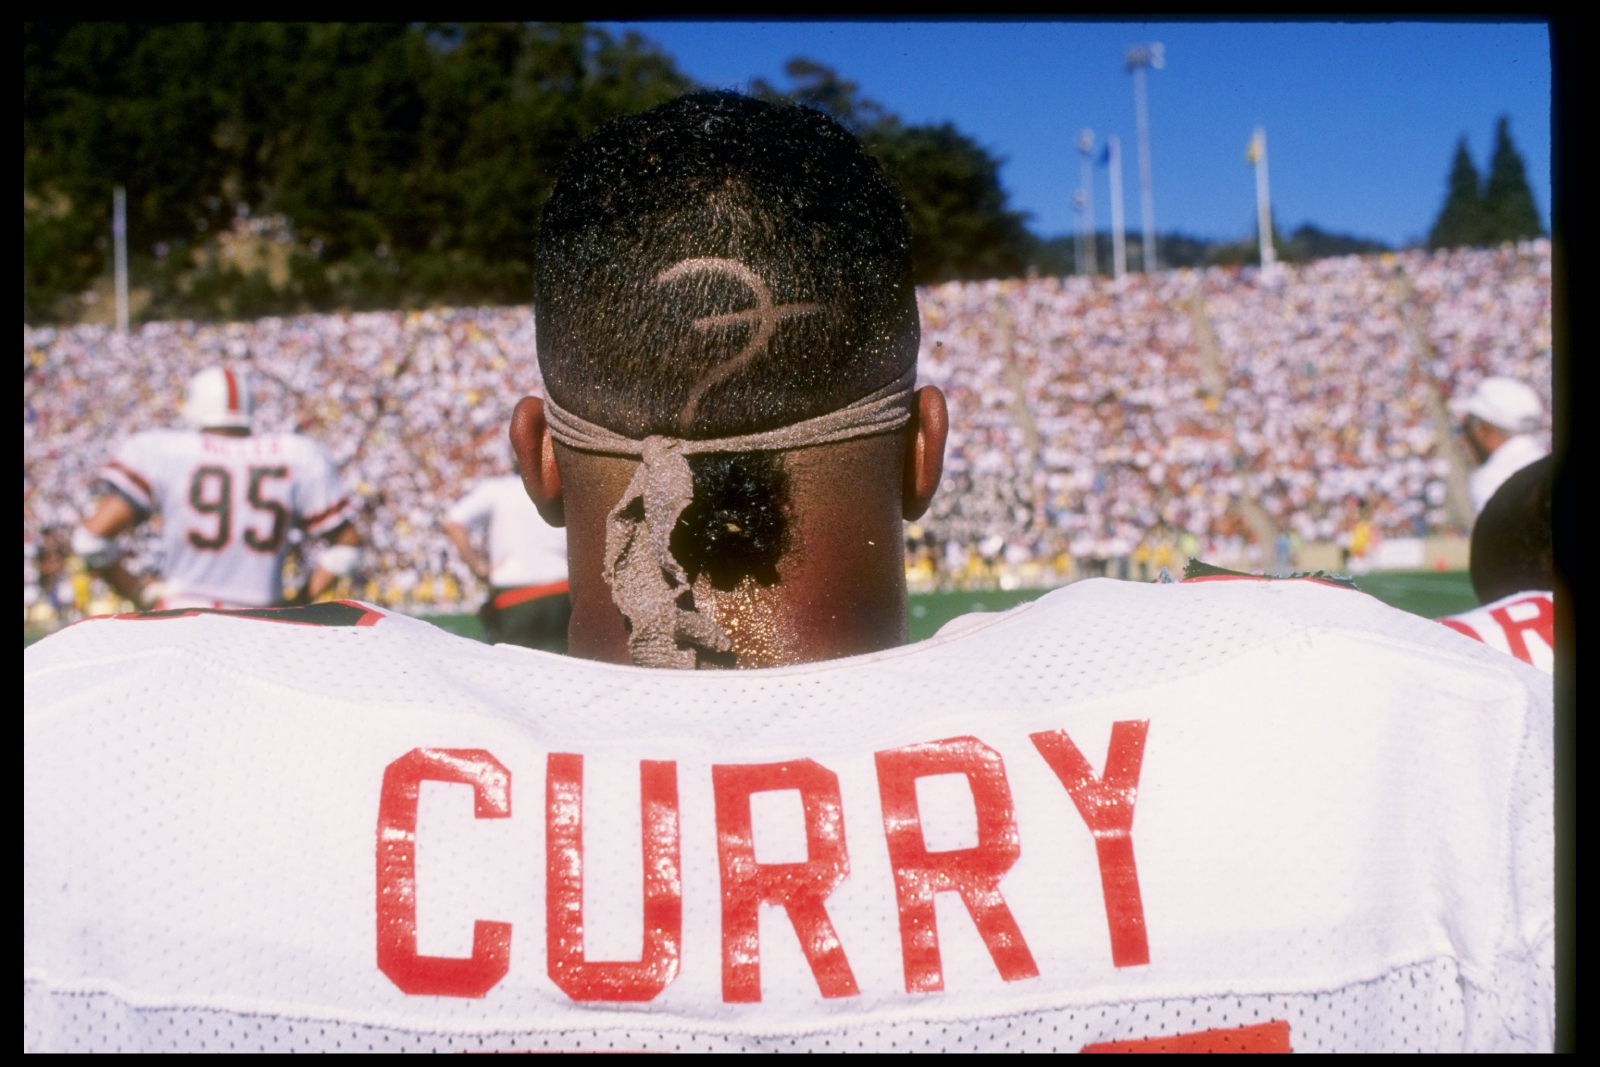 Former Indianapolis Colts and Miami Hurricanes star Shane Curry could have had a breakout year in 1992, but lost his life way too soon.